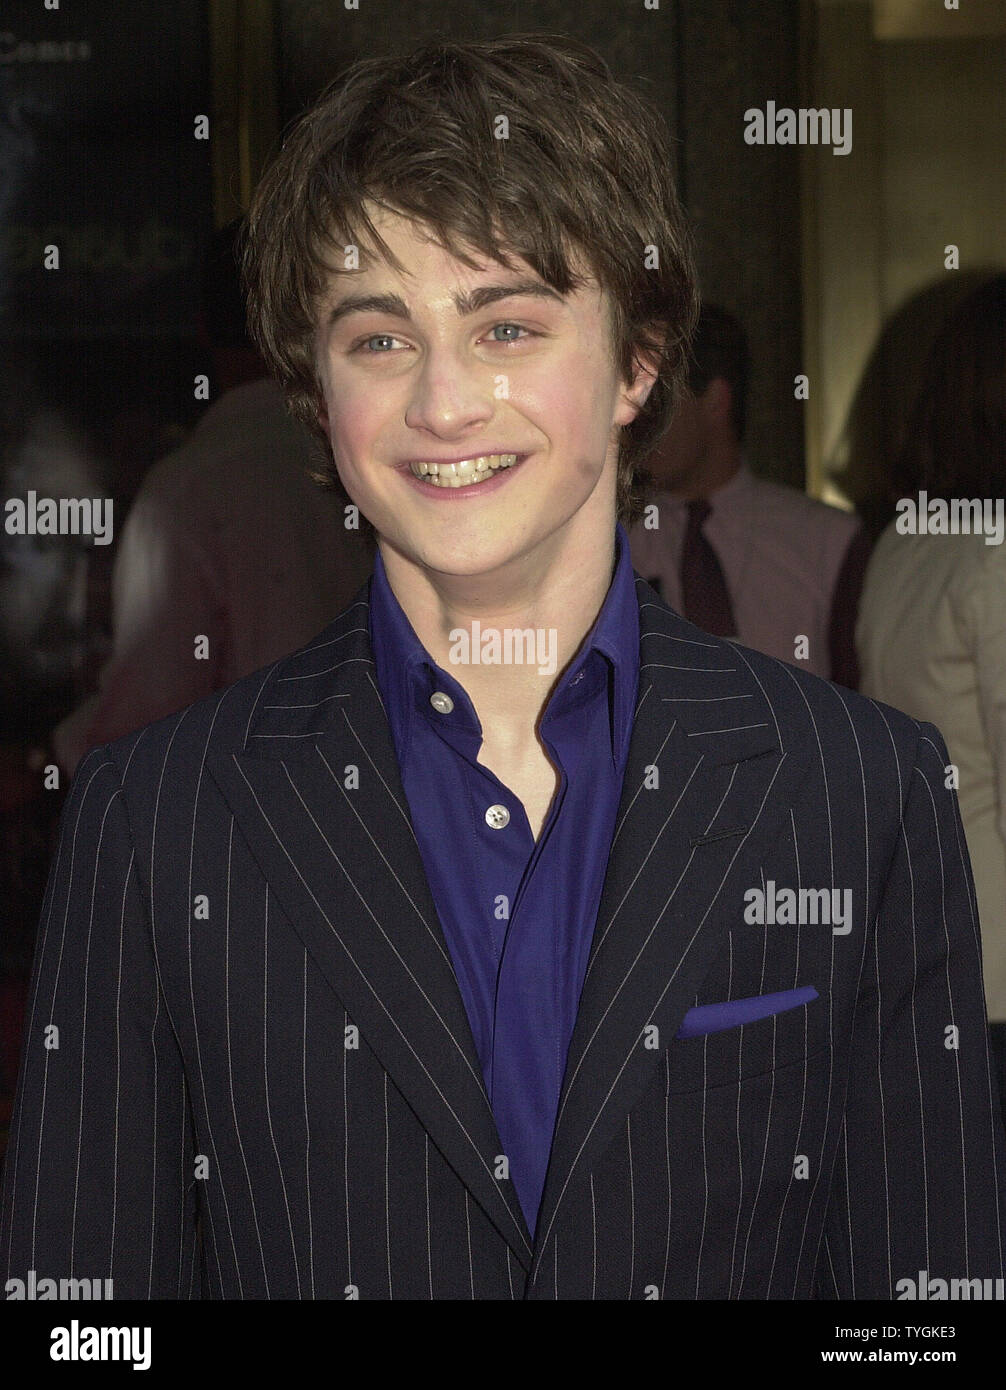 Actor Daniel Radcliffe who protrays Harry Potter poses on May 23 ...